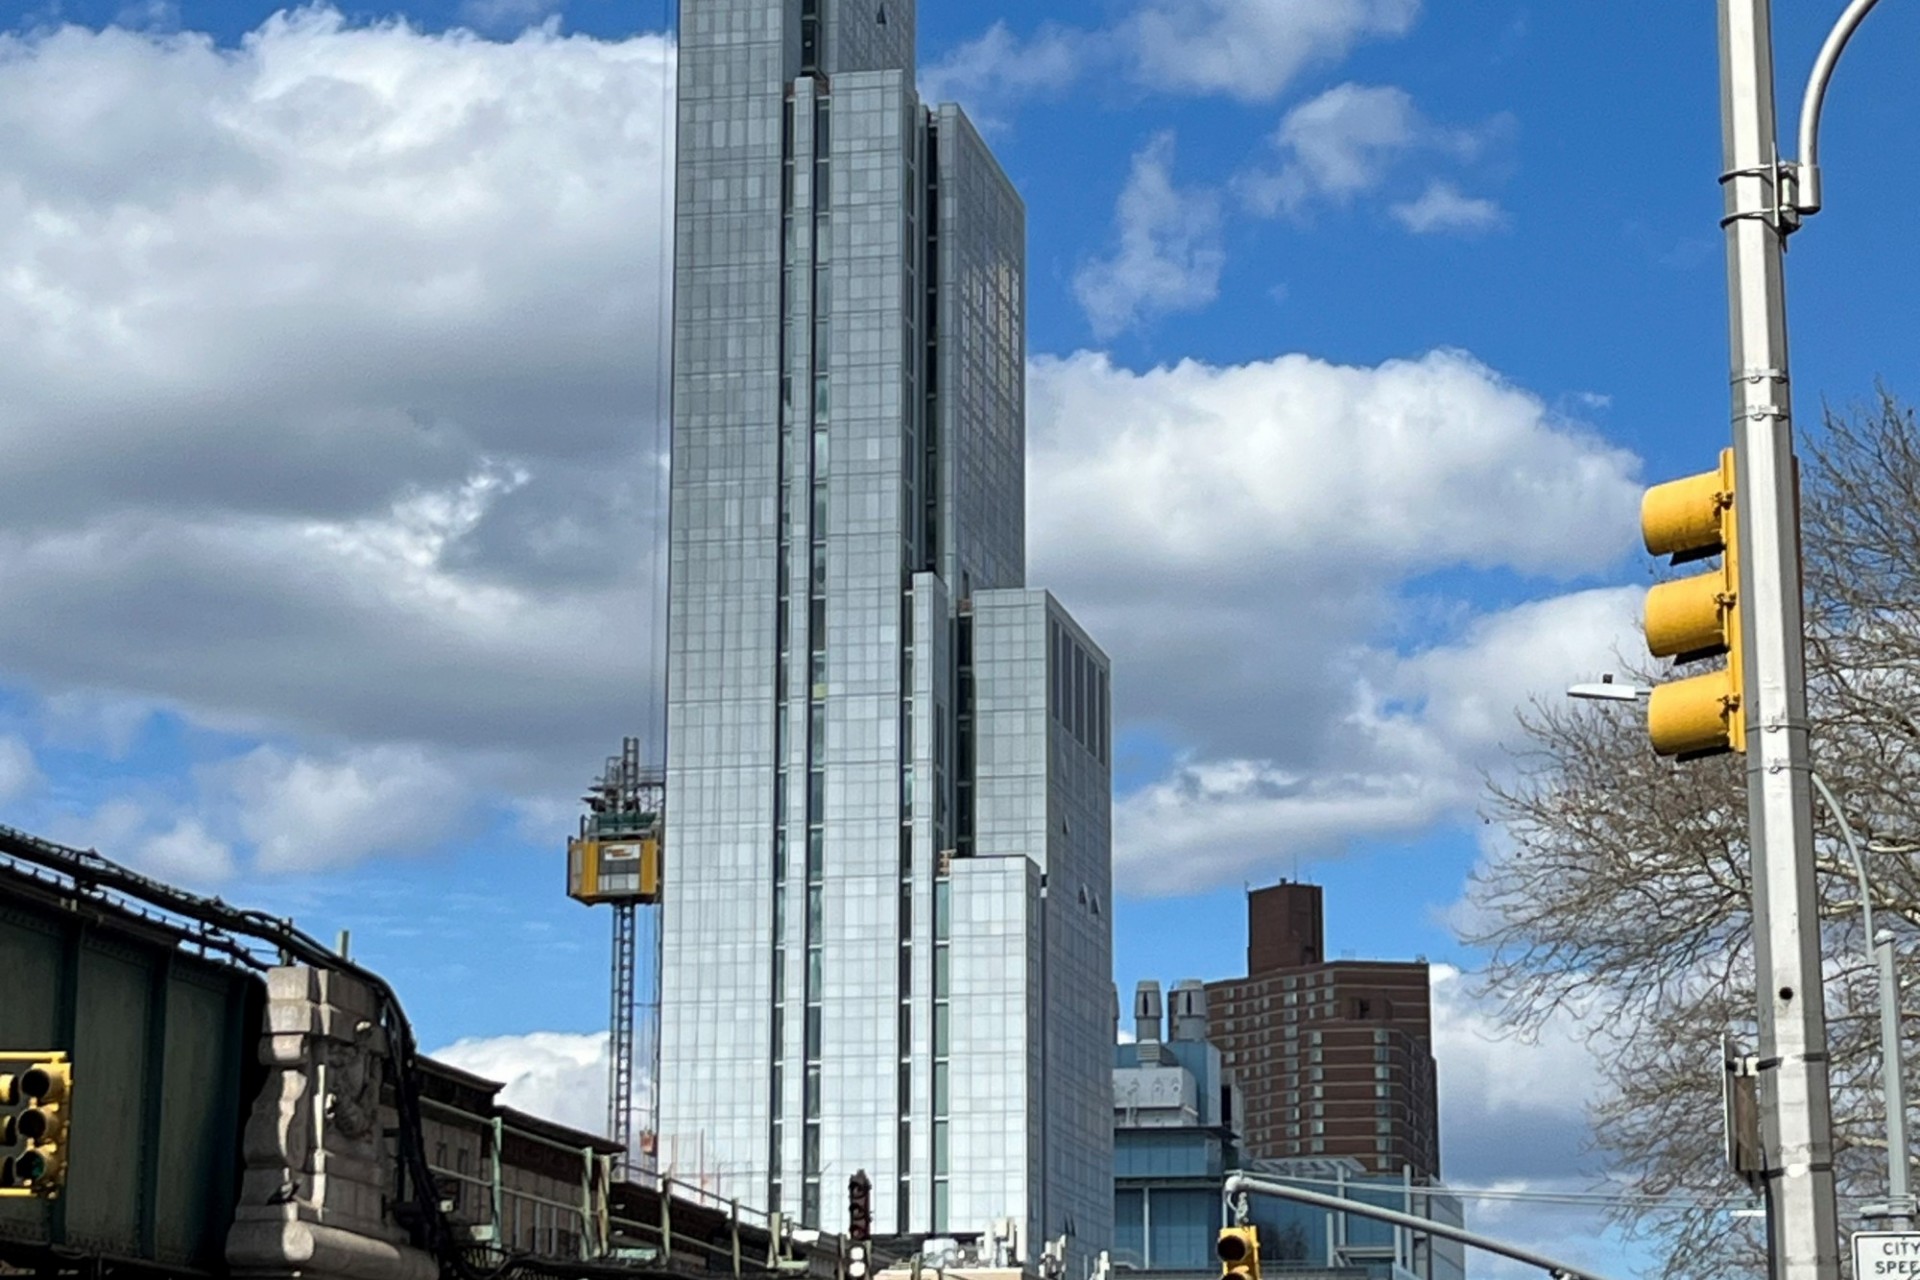 A view of the 600 W. 125th Street from the street level, with the raised subway platform running alongside and Jerome L. Greene Science Center in the background.